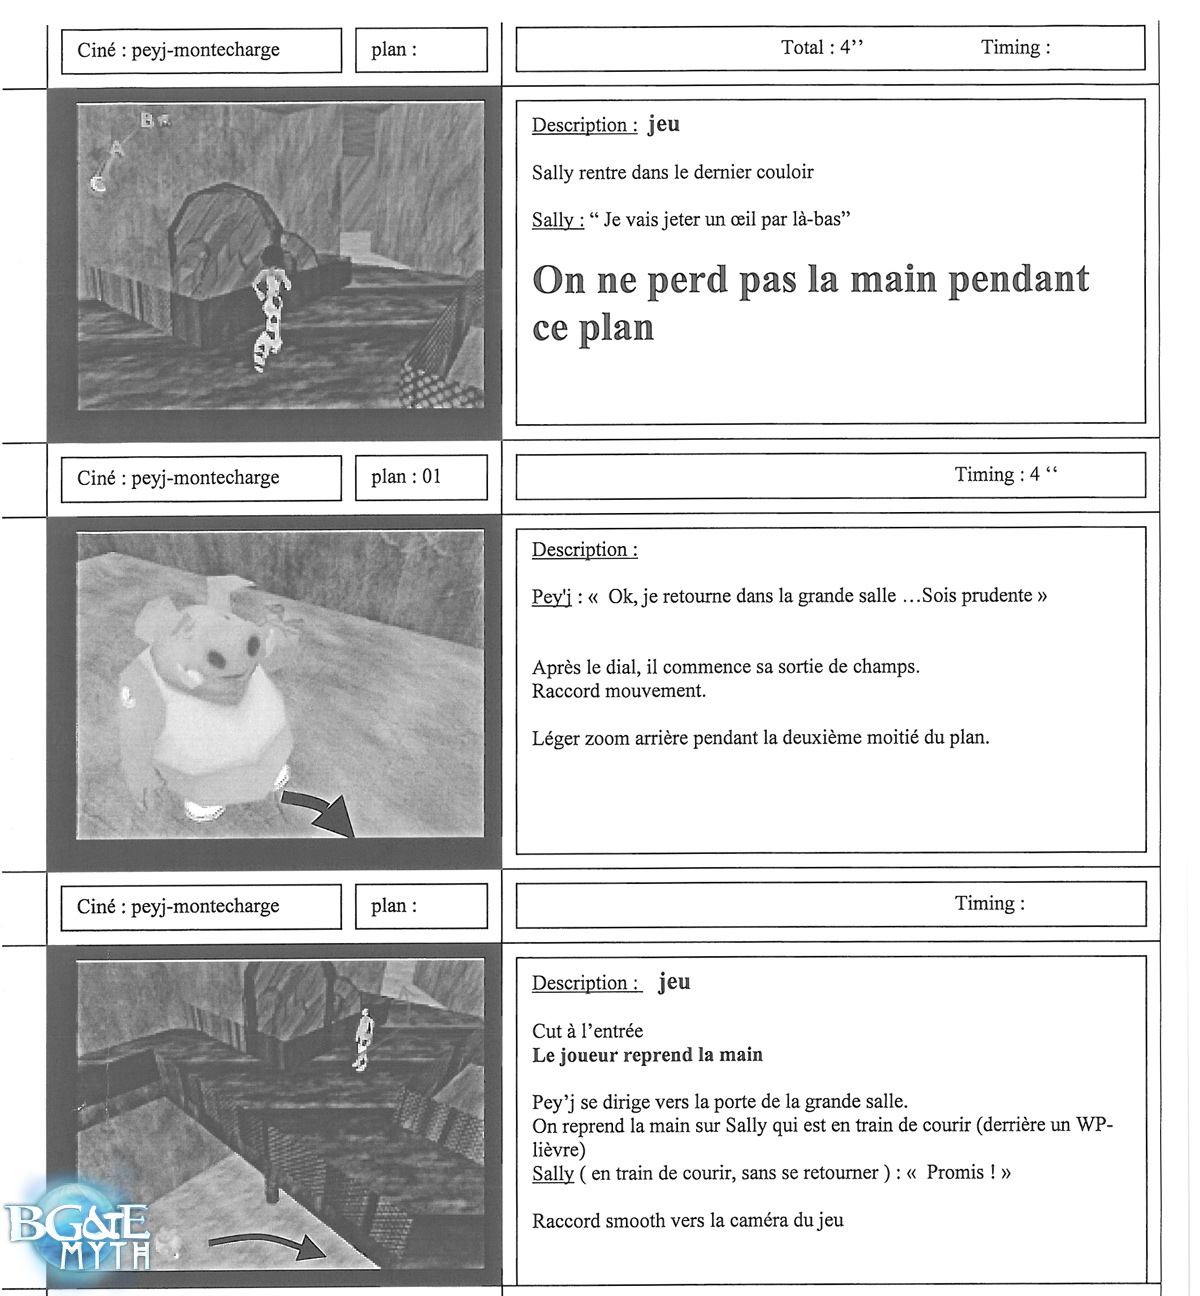 [Storyboard] Monte-charge droit devant ! - Page 1